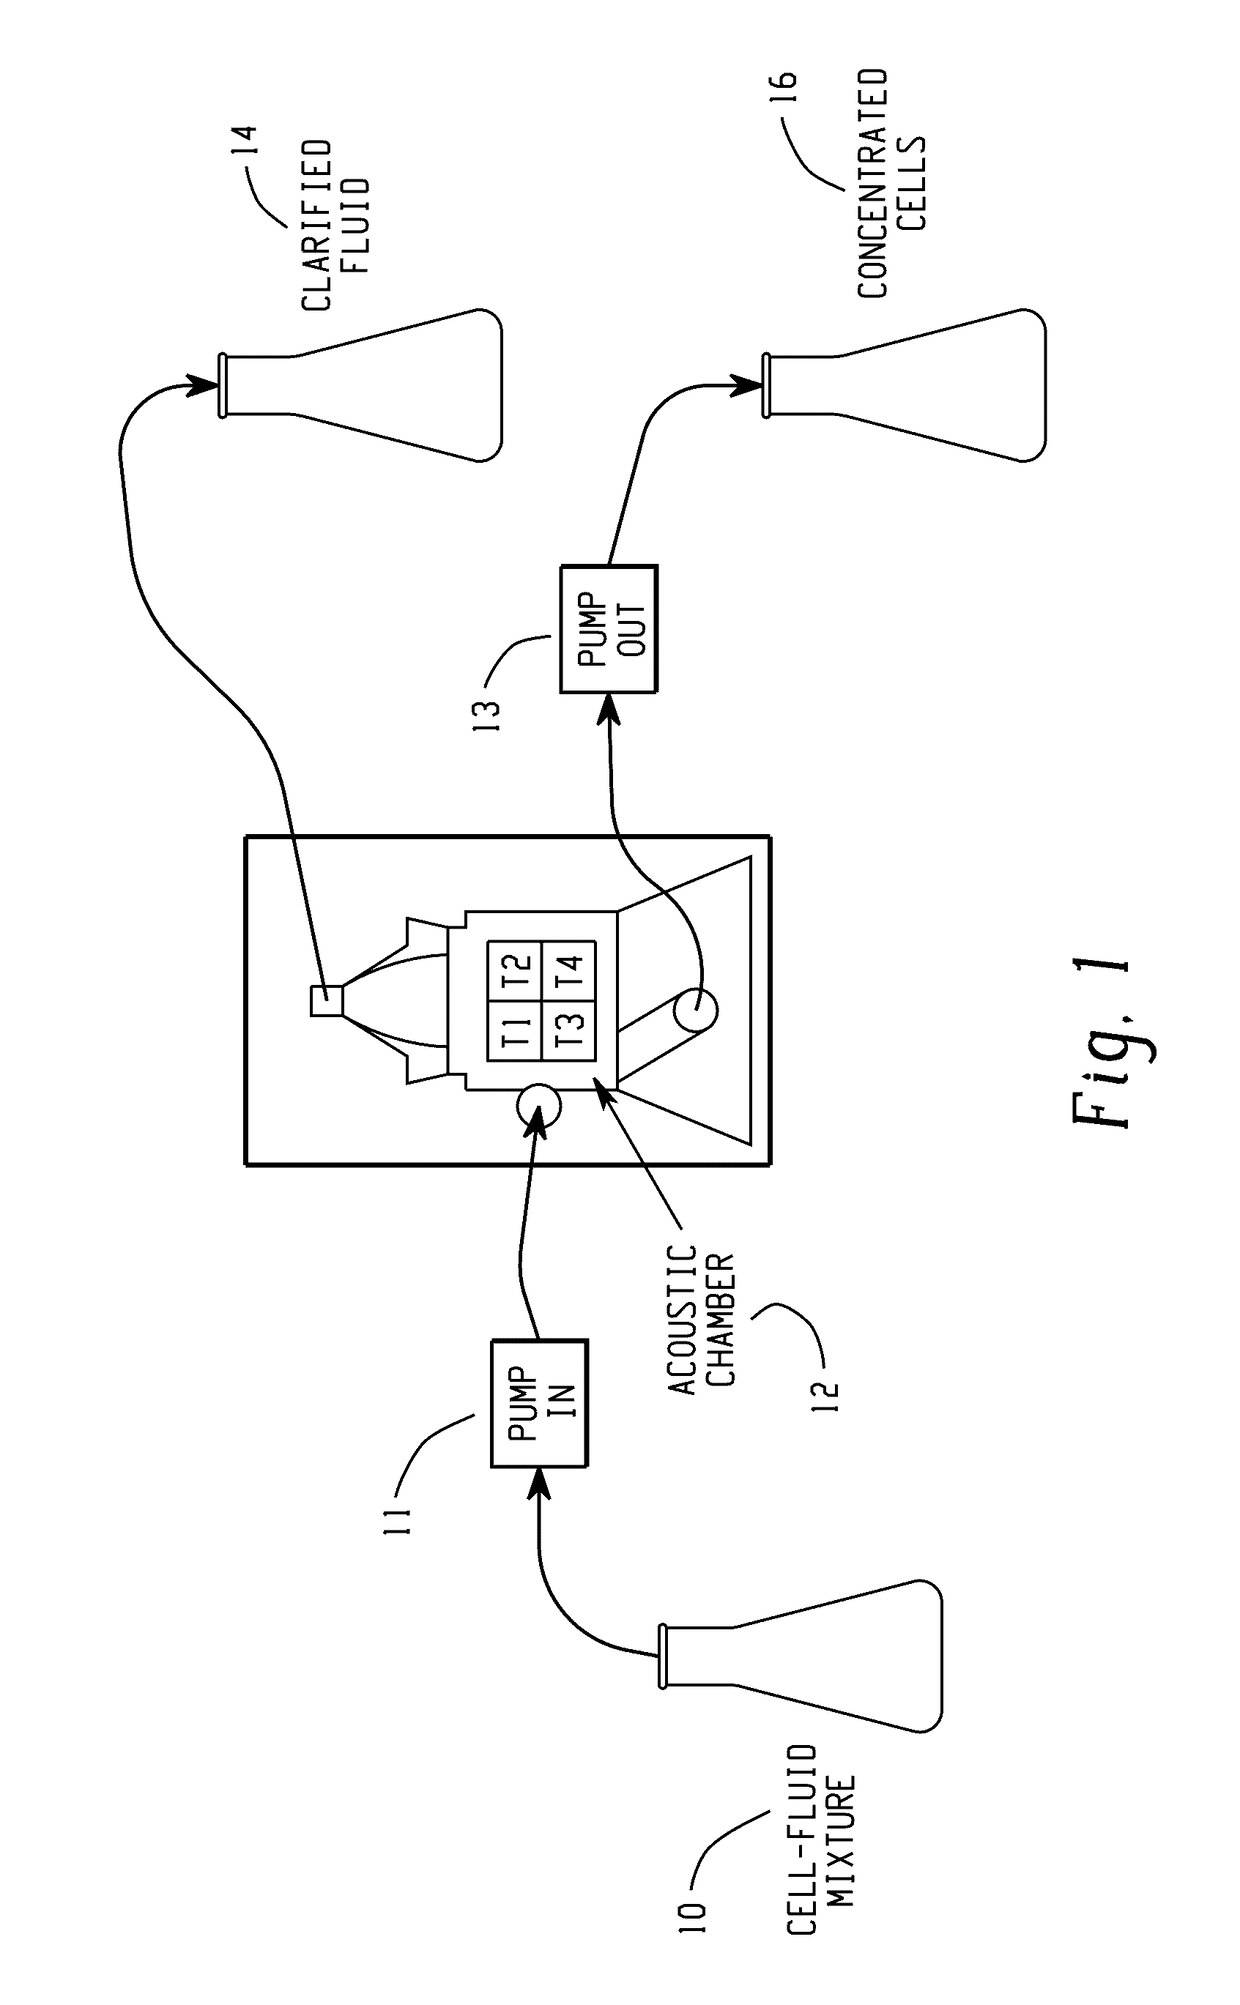 Methods and apparatus for particle aggregation using acoustic standing waves